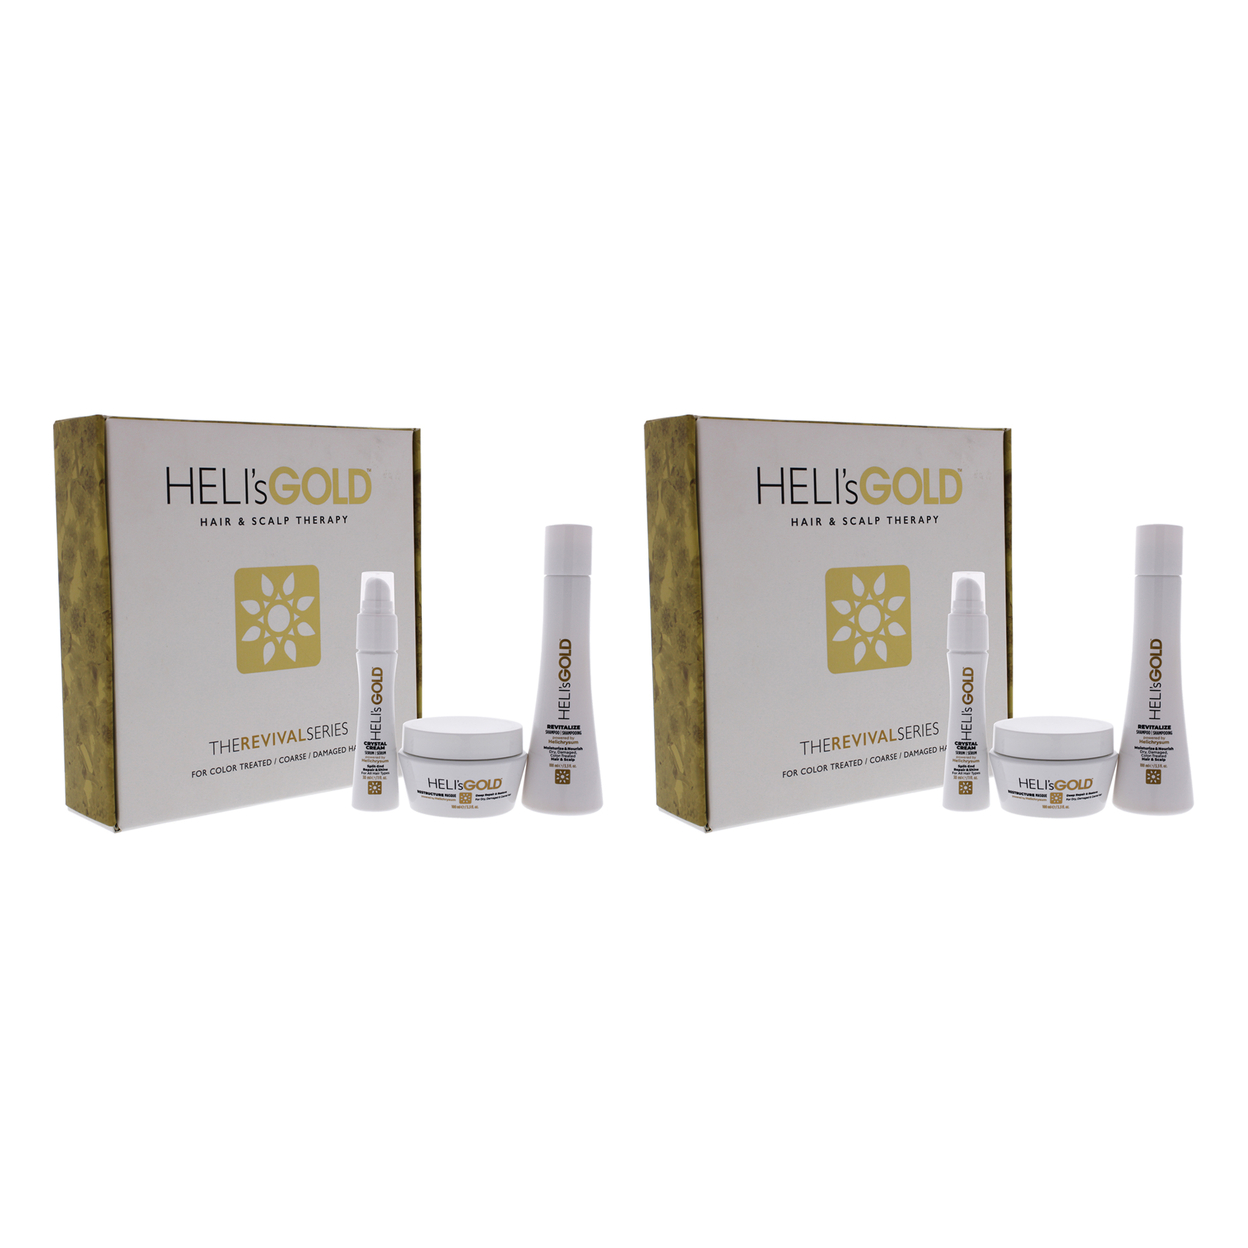 Helis Gold The Revival Series Travel Kit - Pack Of 2 3.3oz Revitalize Shampoo, 3.3oz Restructure Masque, 1oz Crystal Cream Serum 3 Pc